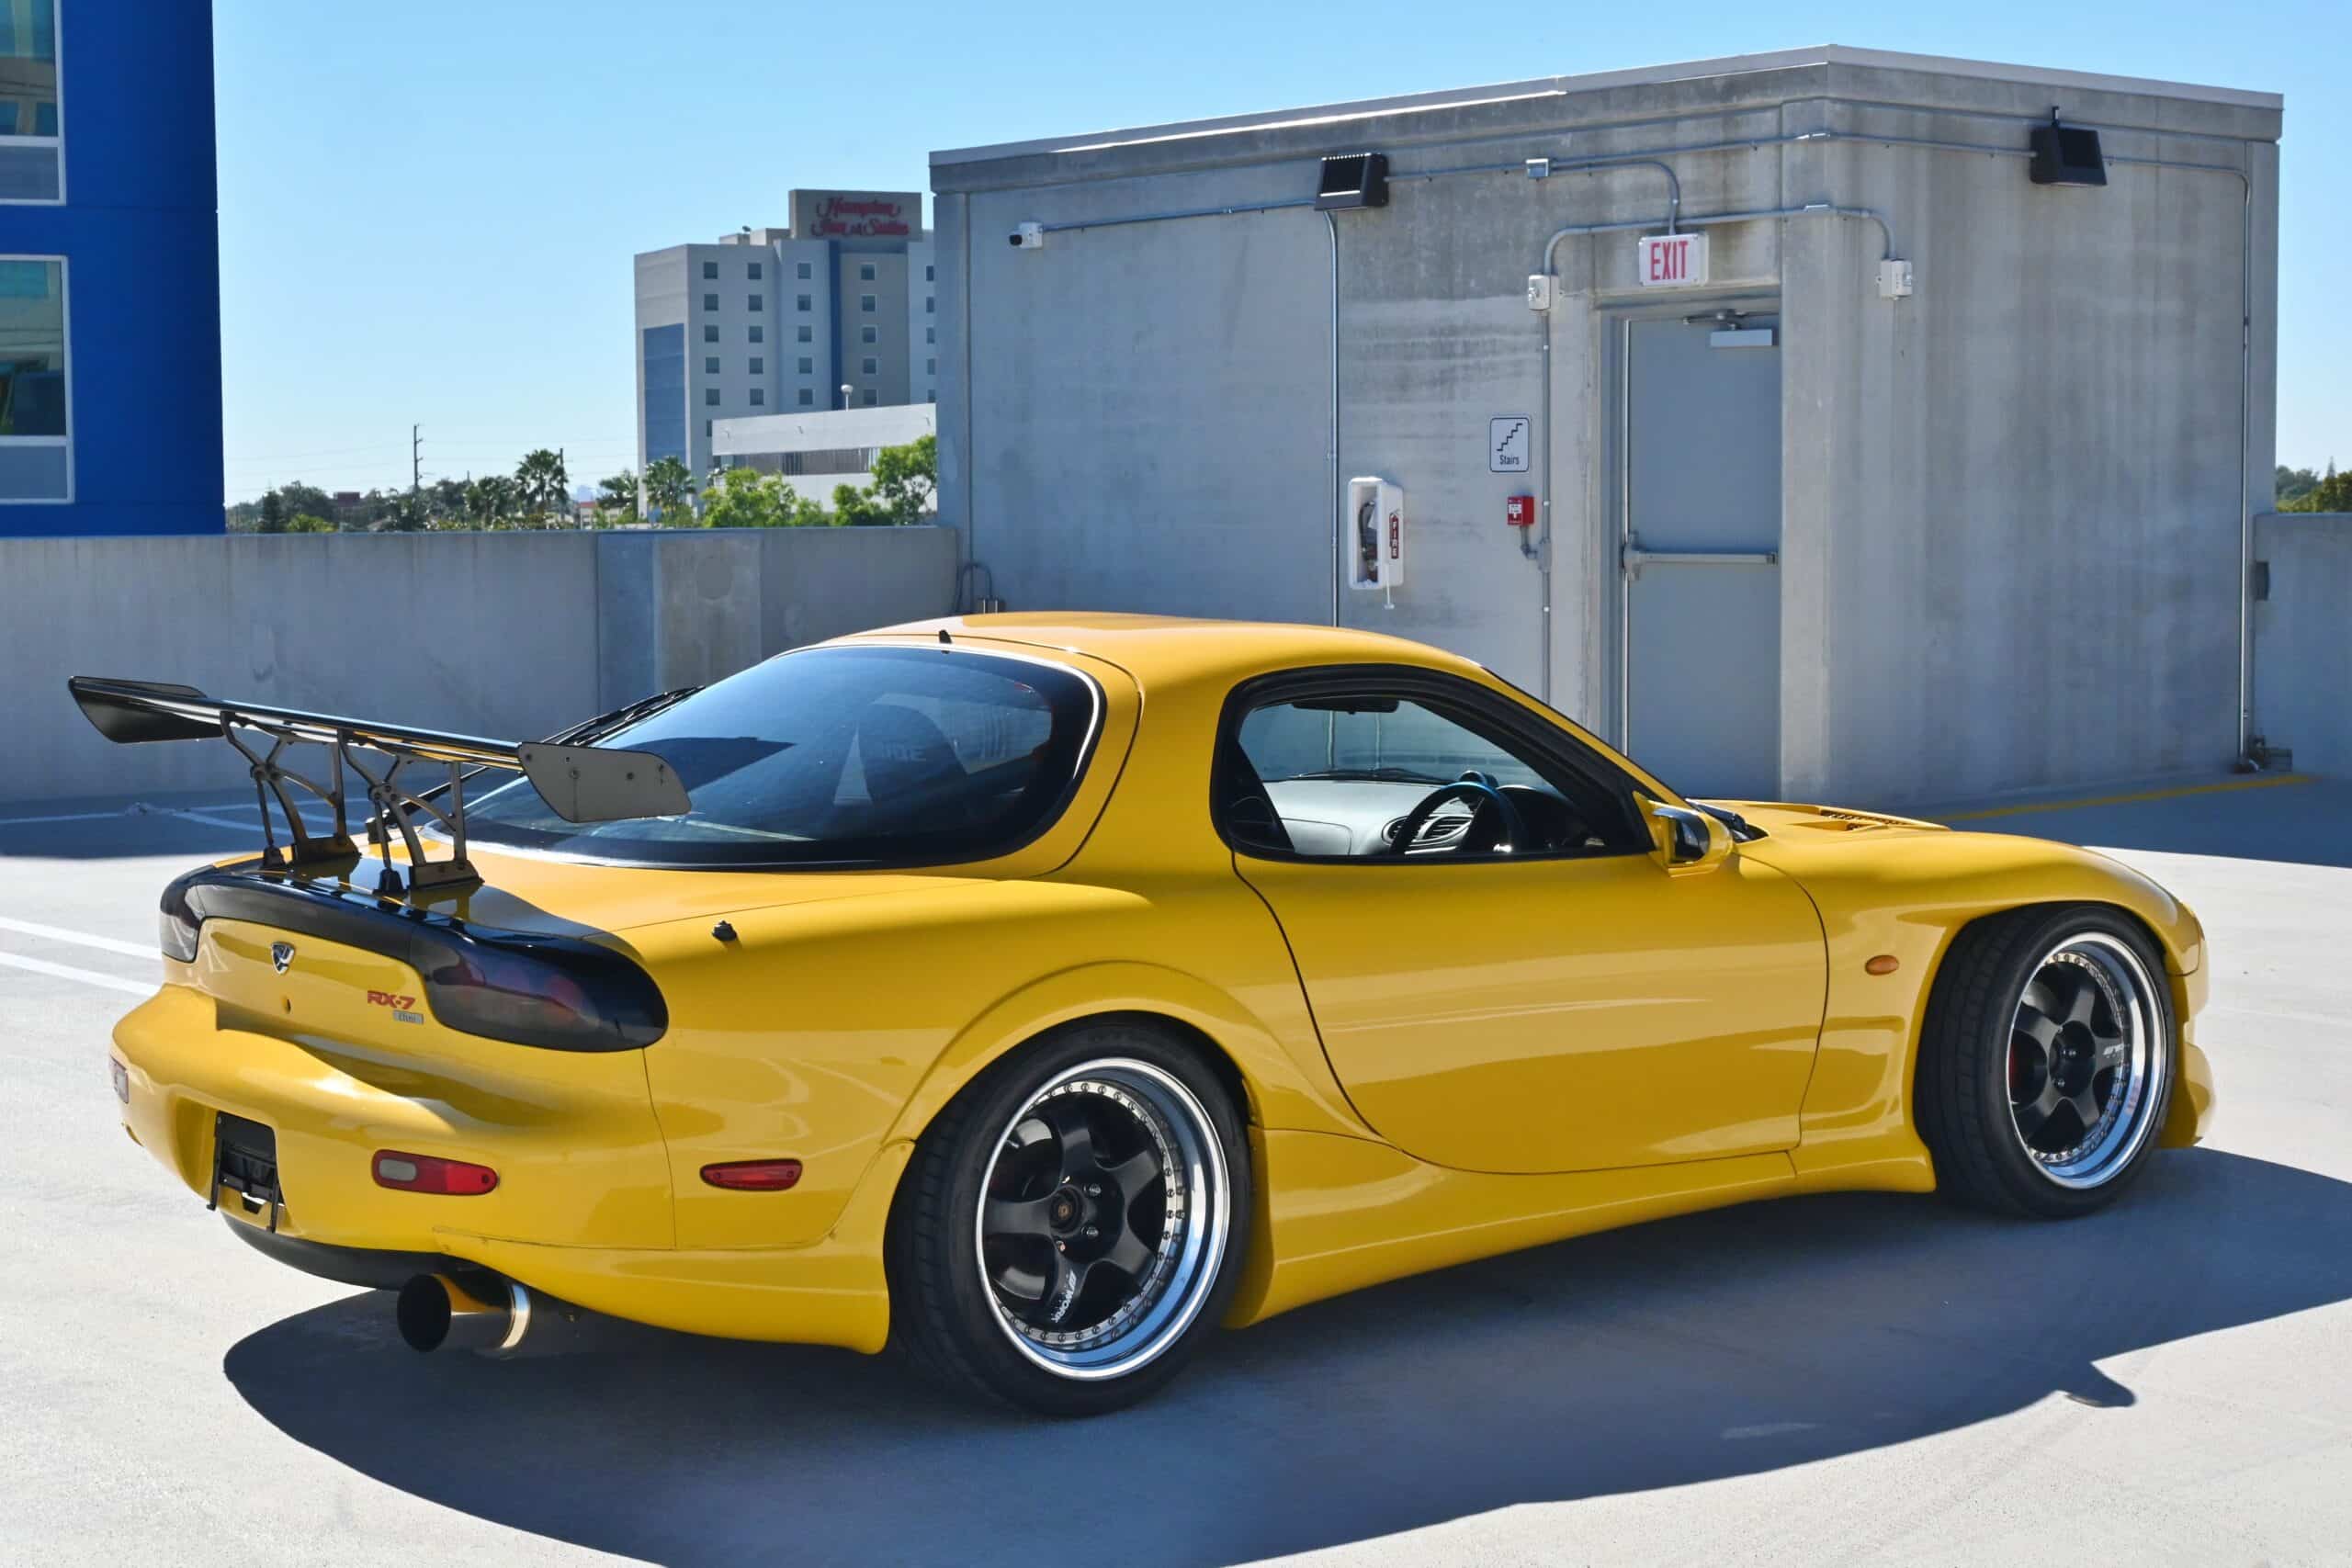 1992 Mazda RX-7 Efini FD3S RE-Ameyiya / T78-33D Single Turbo / Ohlins Coilovers / Work Meister S1 / 500+ HP